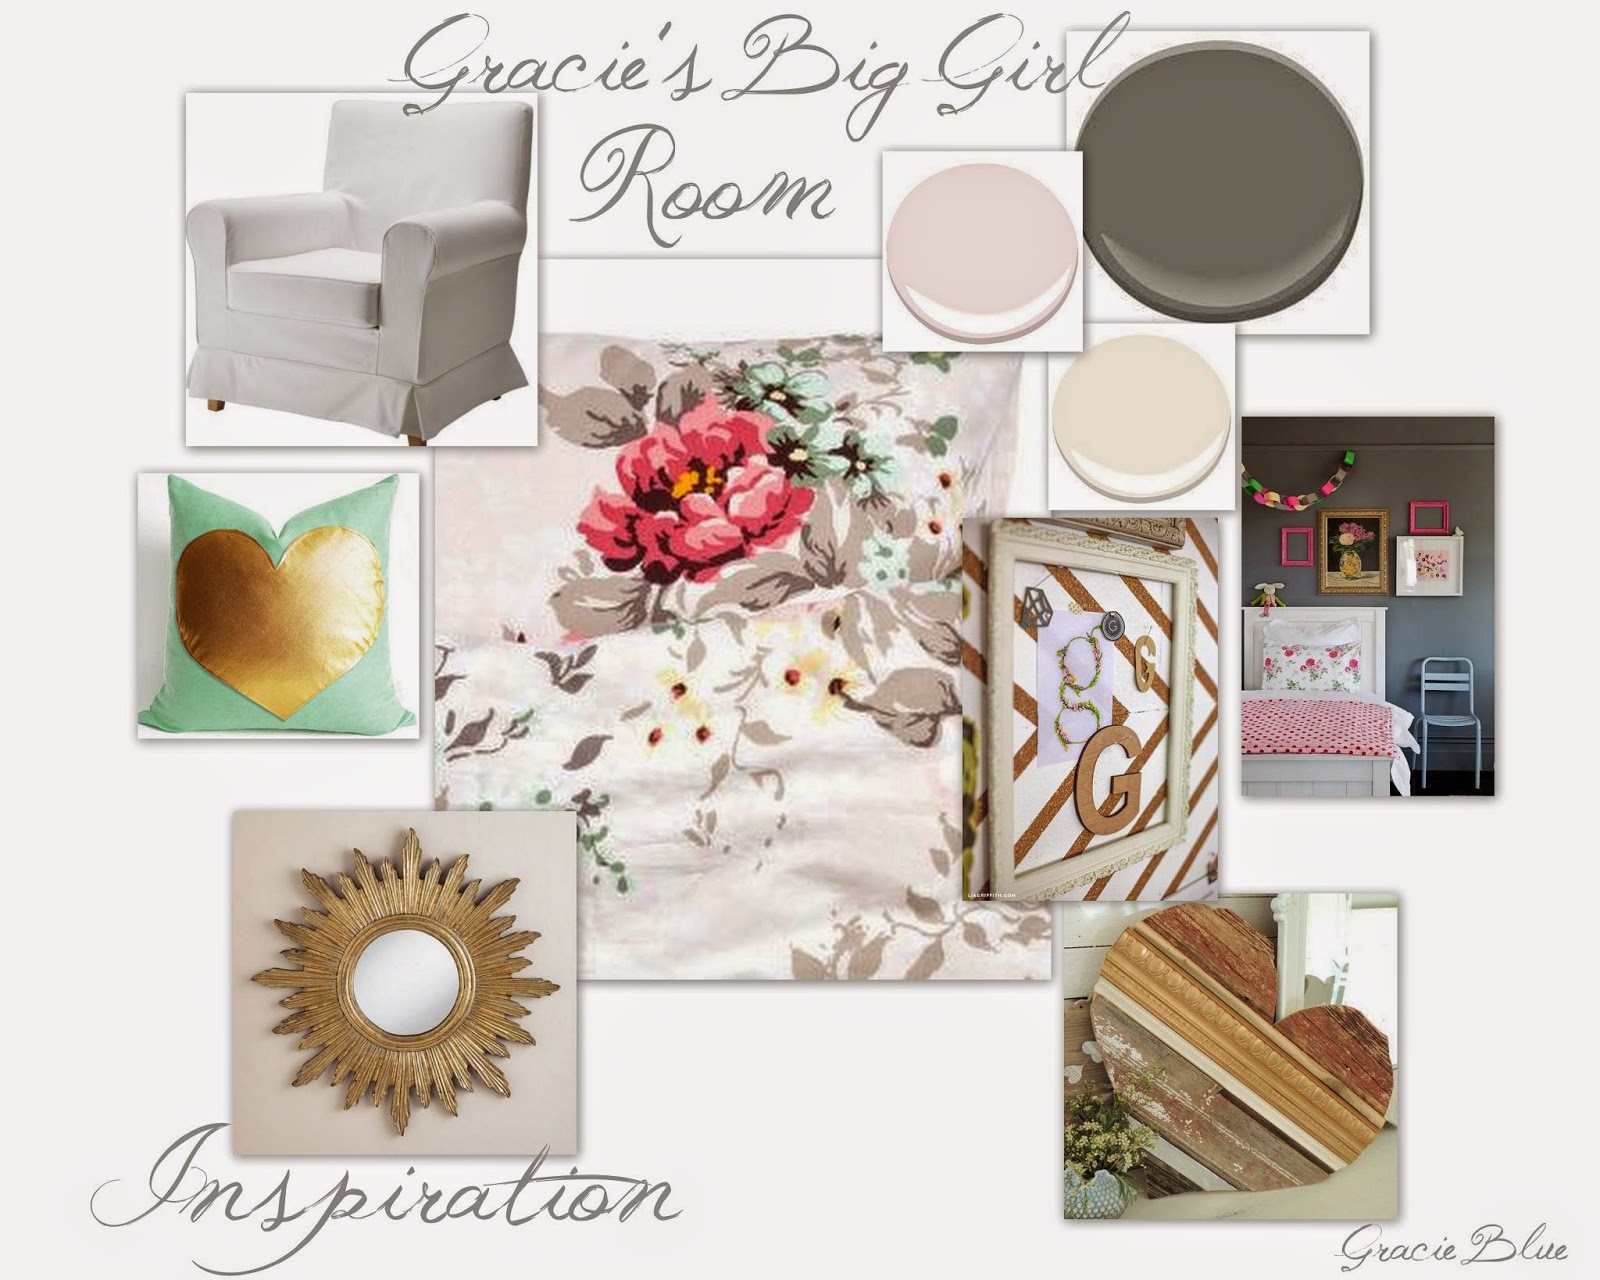 Gracie Blue : Gracie's Big Girl Room {the before}